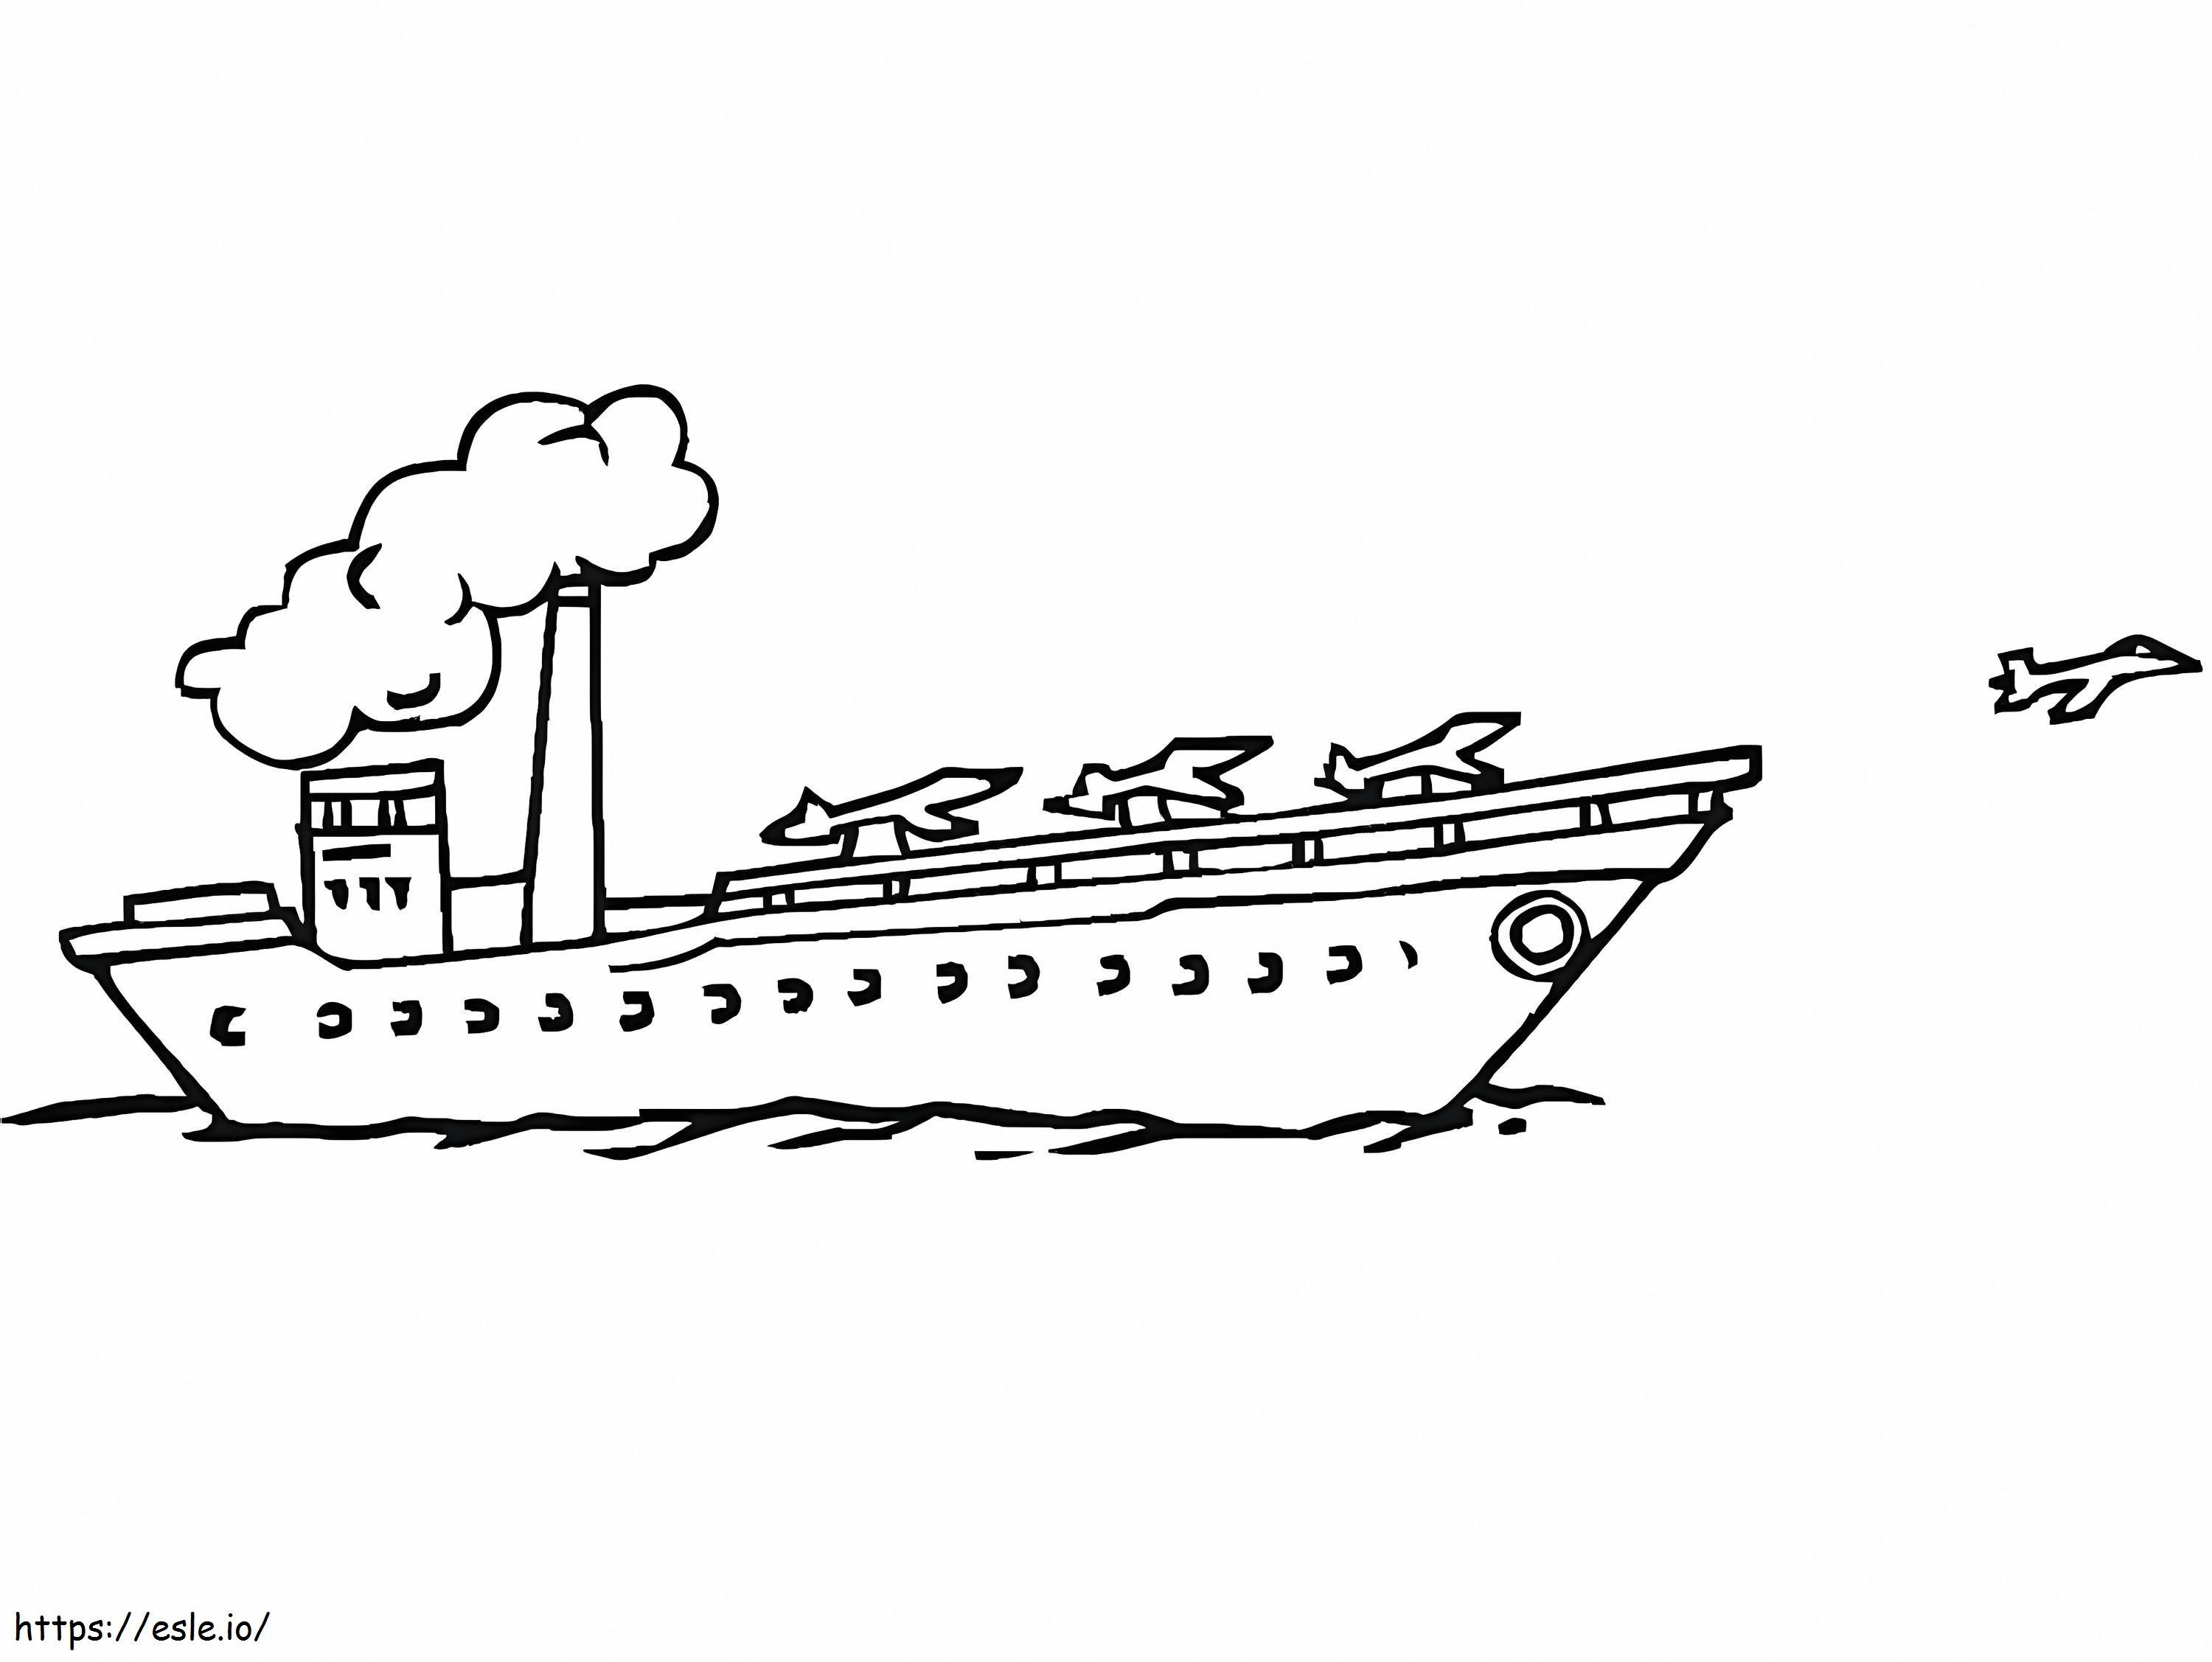 Printable Aircraft Carrier coloring page